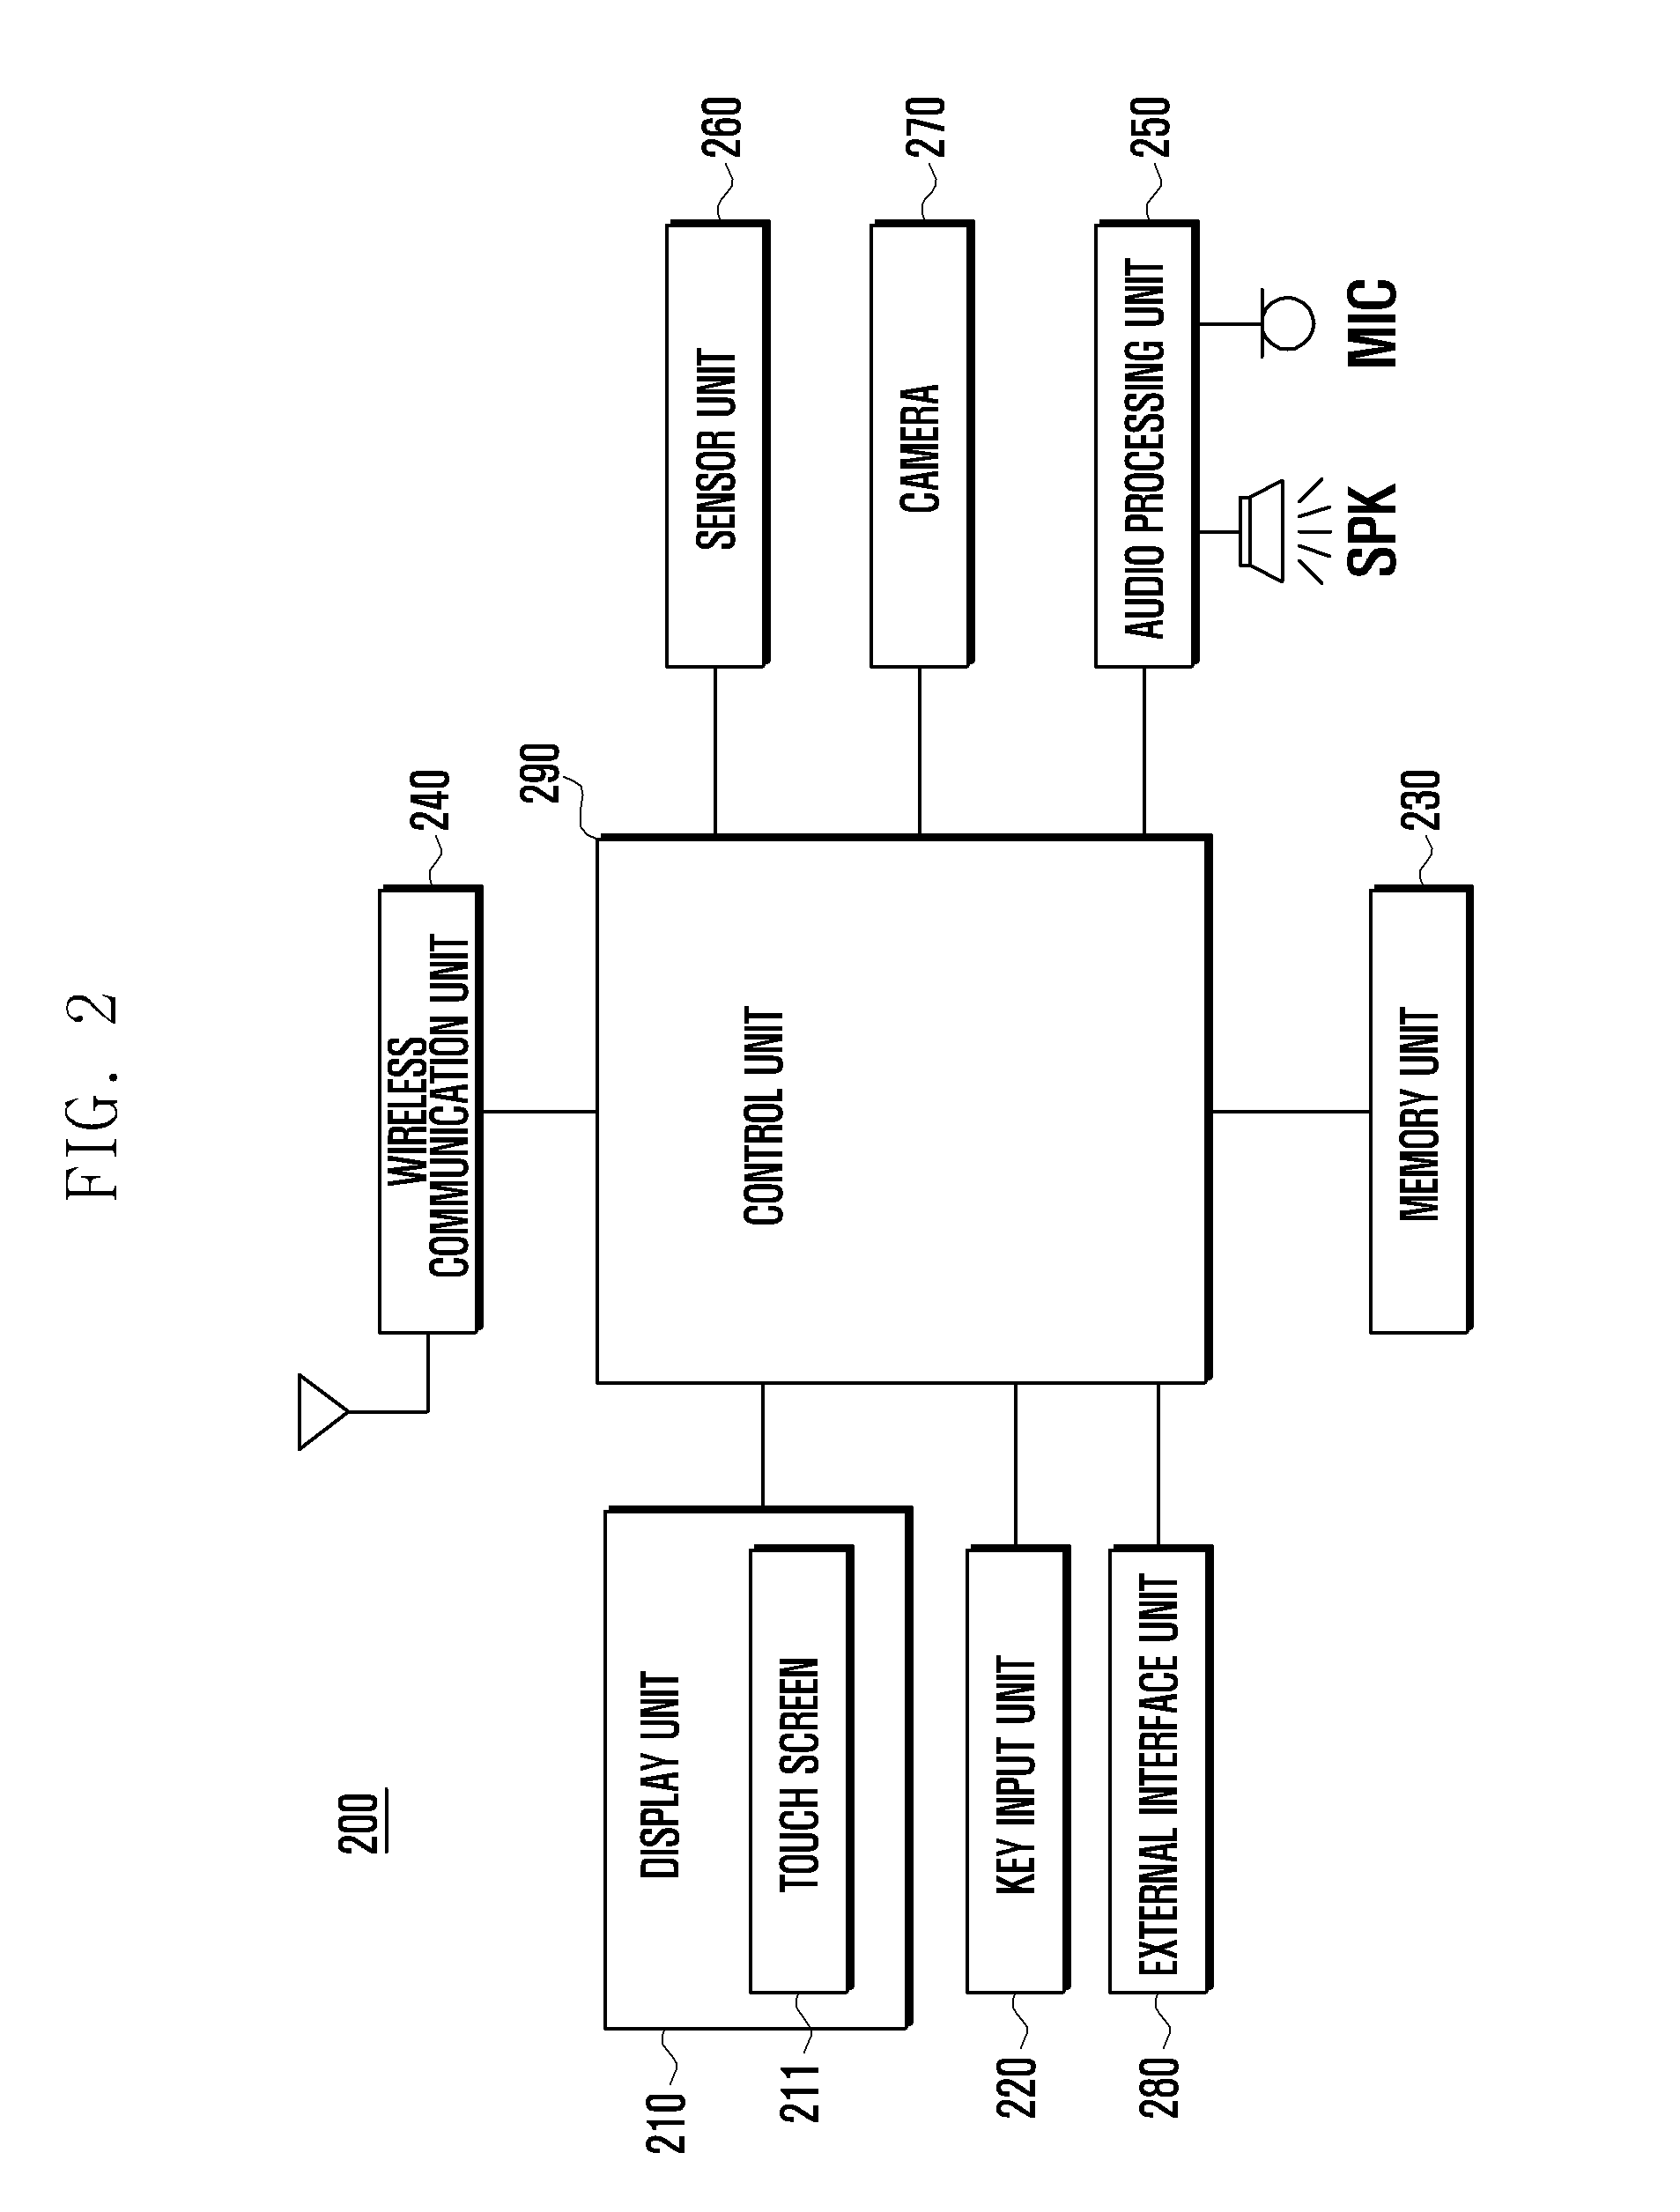 Collaborative data editing and processing system